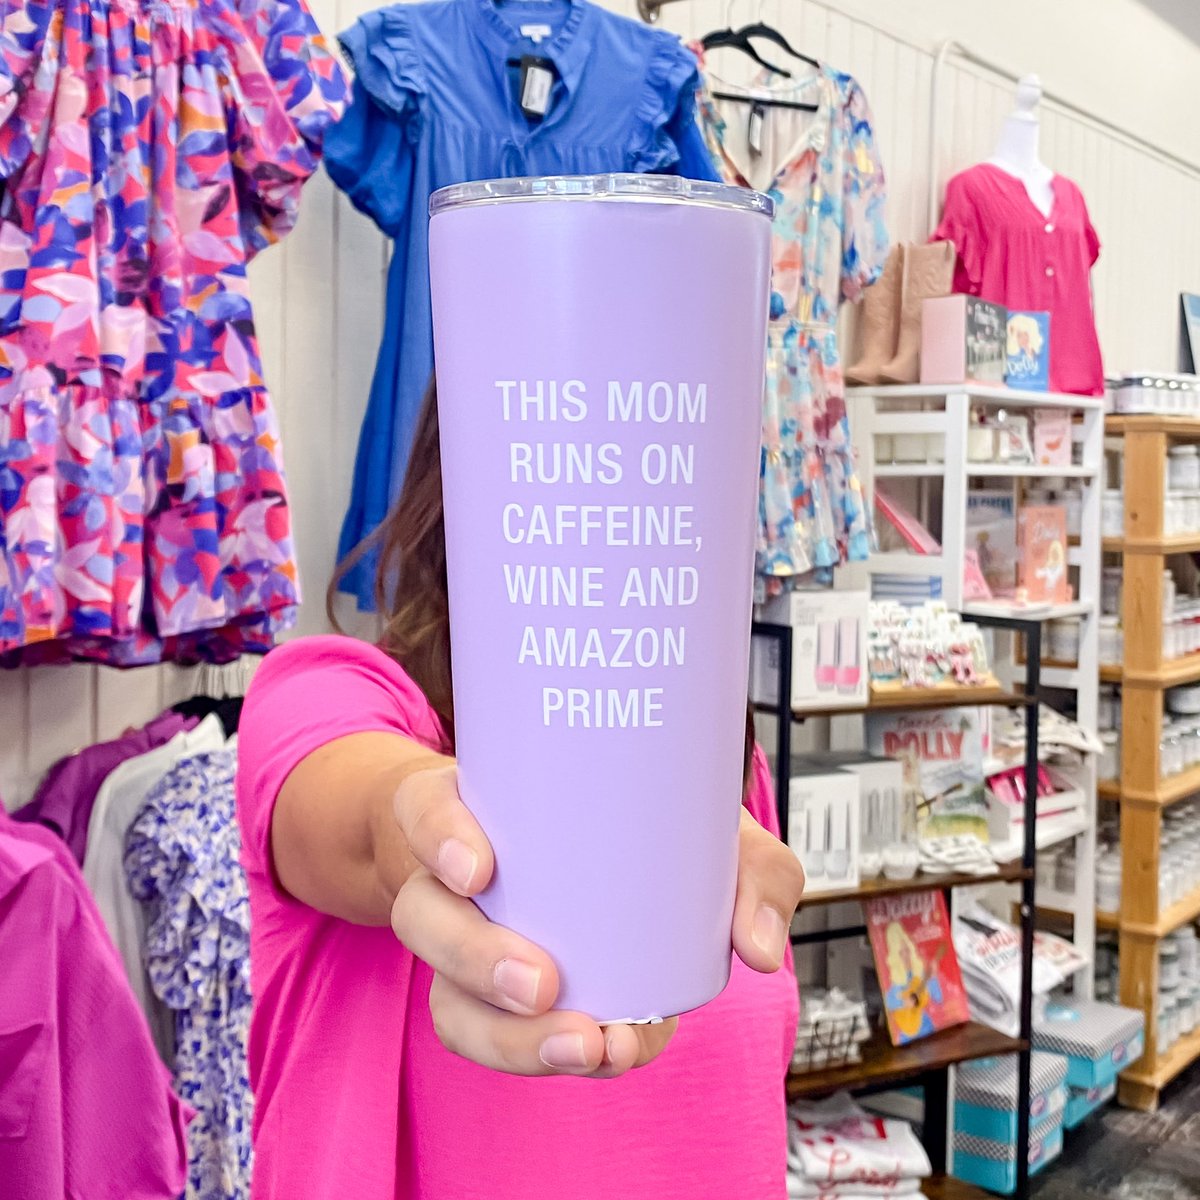 #PrimeDay is coming up! Grab this mug to help you prepare!! Don’t forget to Shop Small too! . . #primedaydeals #visitplano #momlife #planotx #dfwboutique #giftideas #dfwshopping #giftsforher #planomoms #momstyle #texasblogger #planoblogger